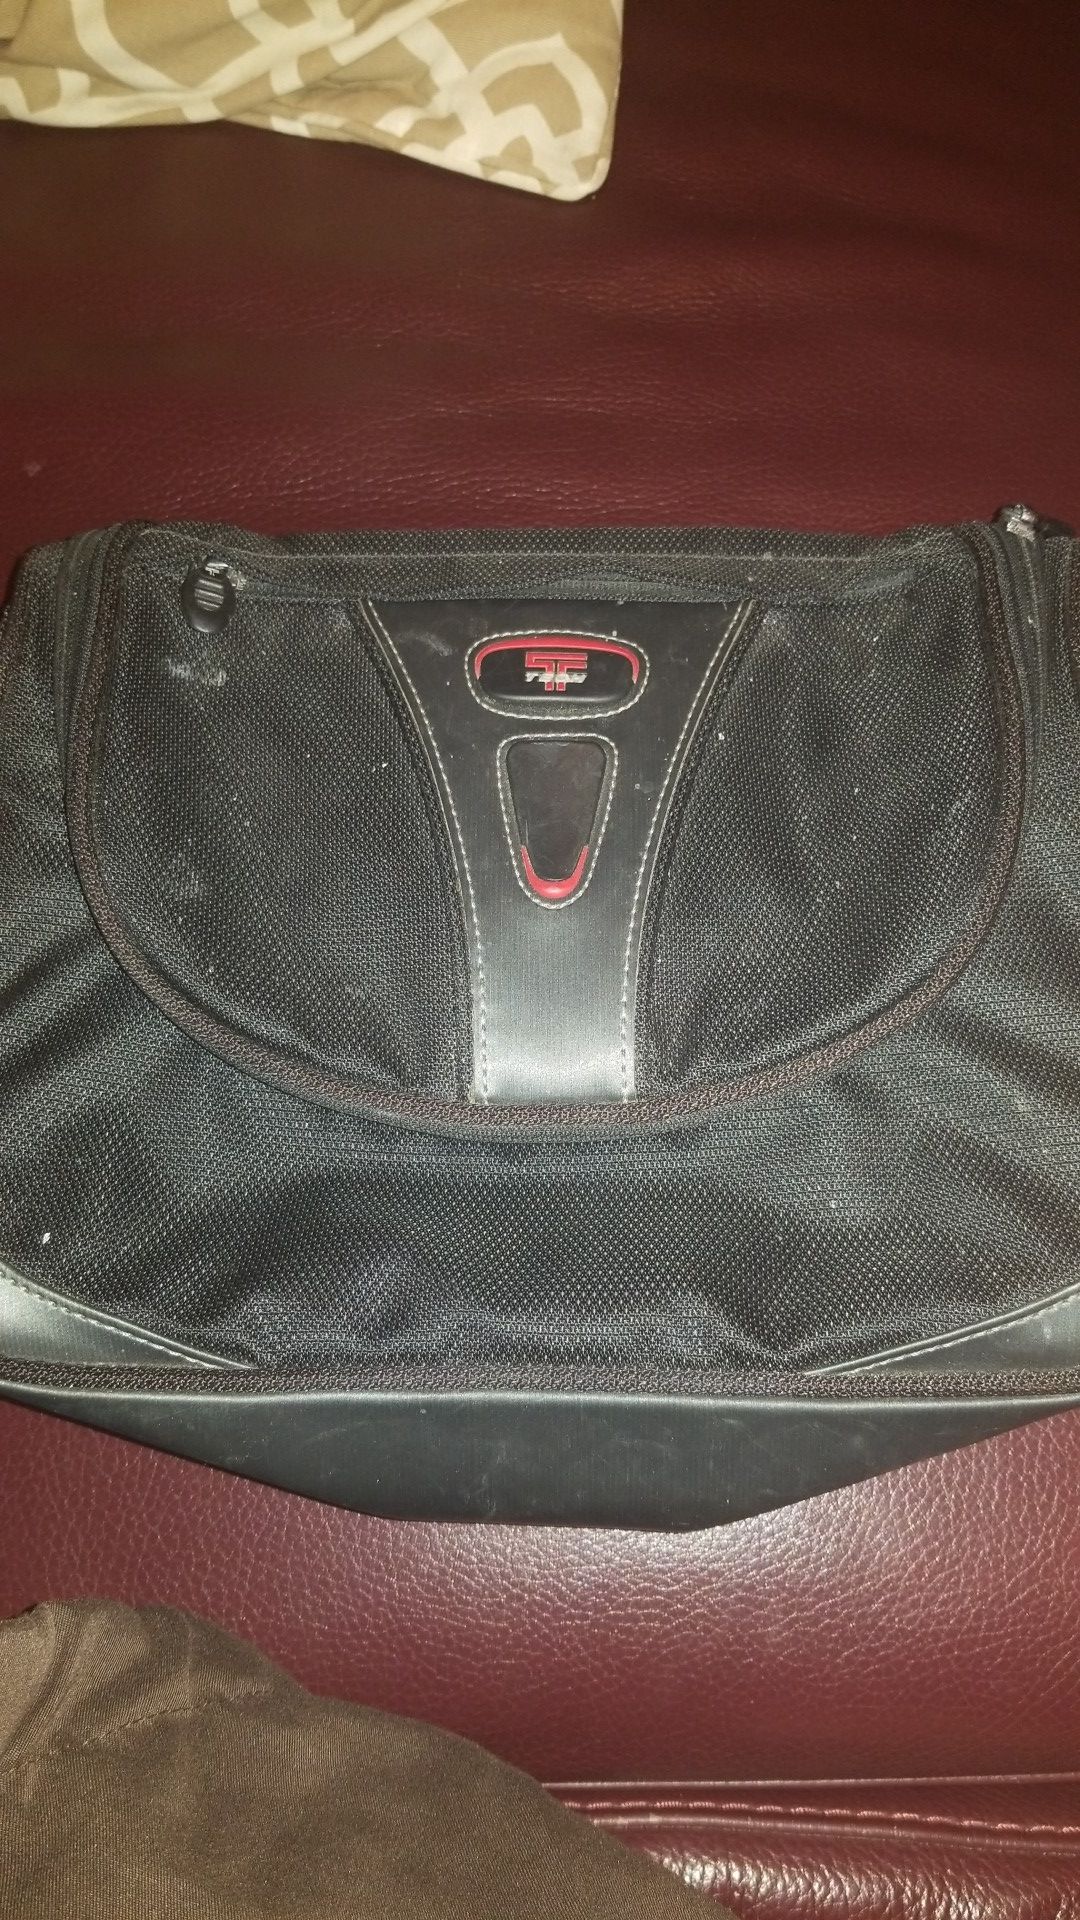 Tumi T-Tech extra large toiletry bag